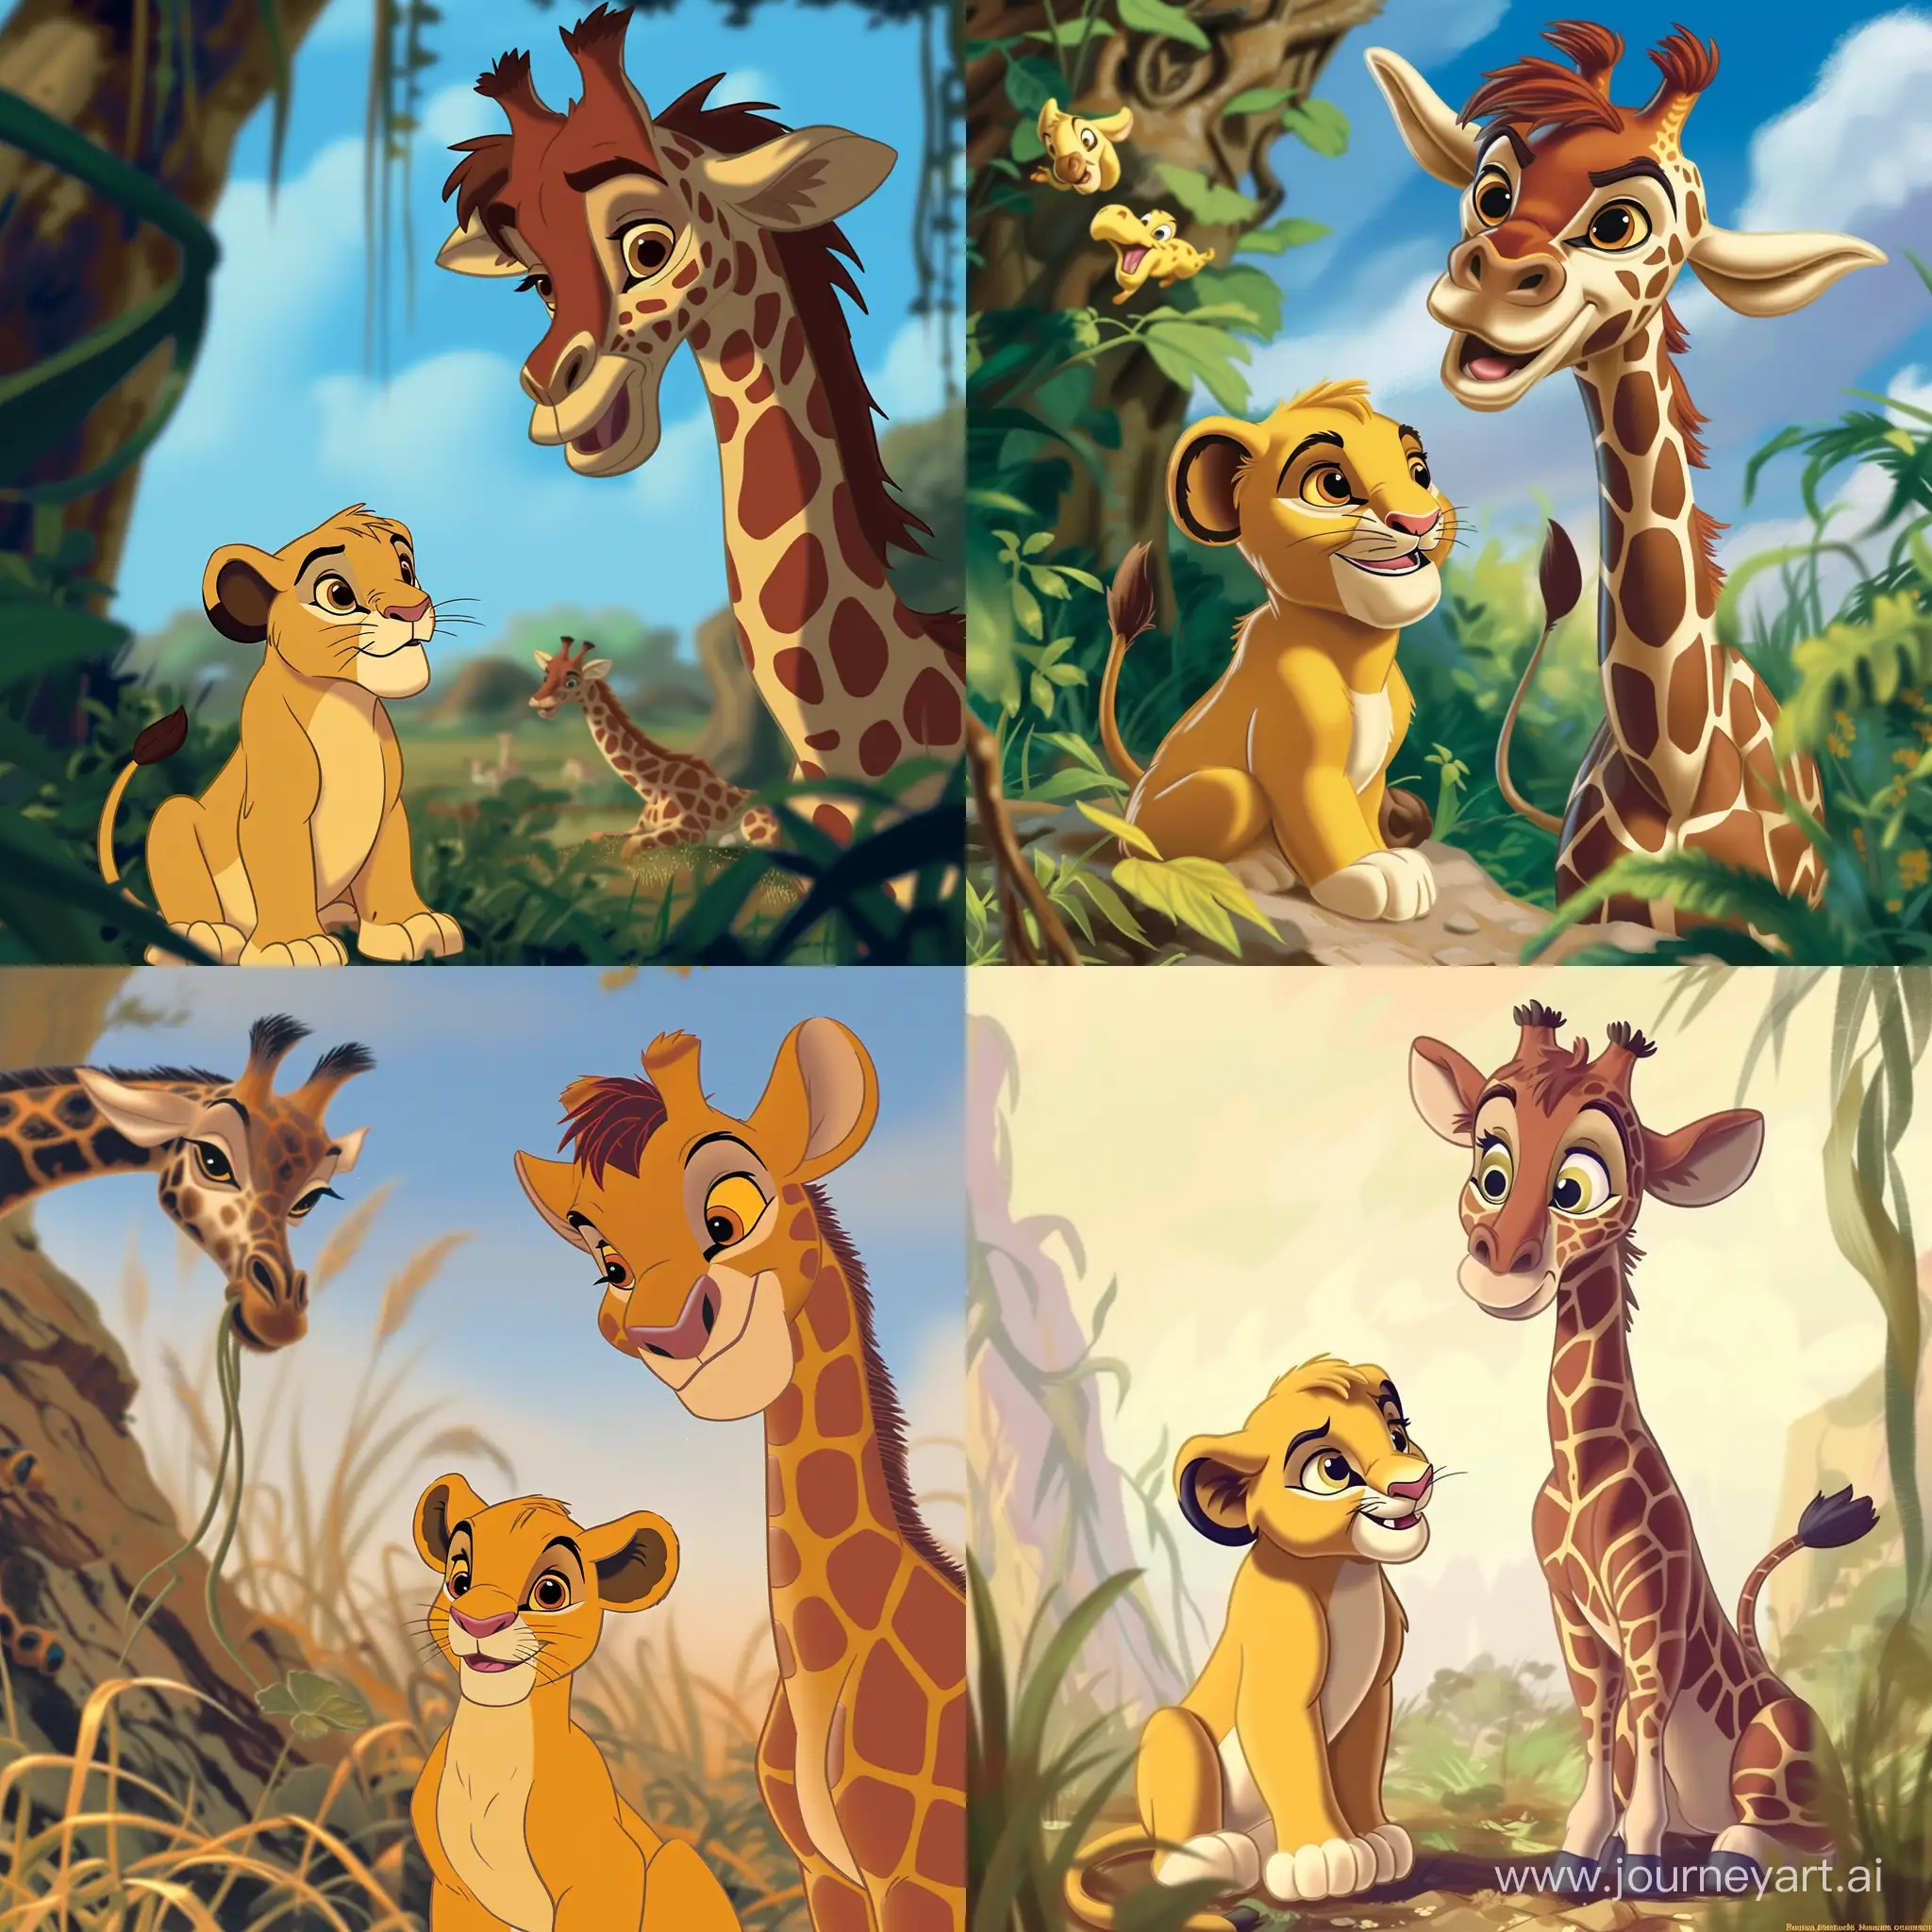 Adorable-DisneyStyle-Lion-Cub-and-Giraffe-in-Engaging-Conversation